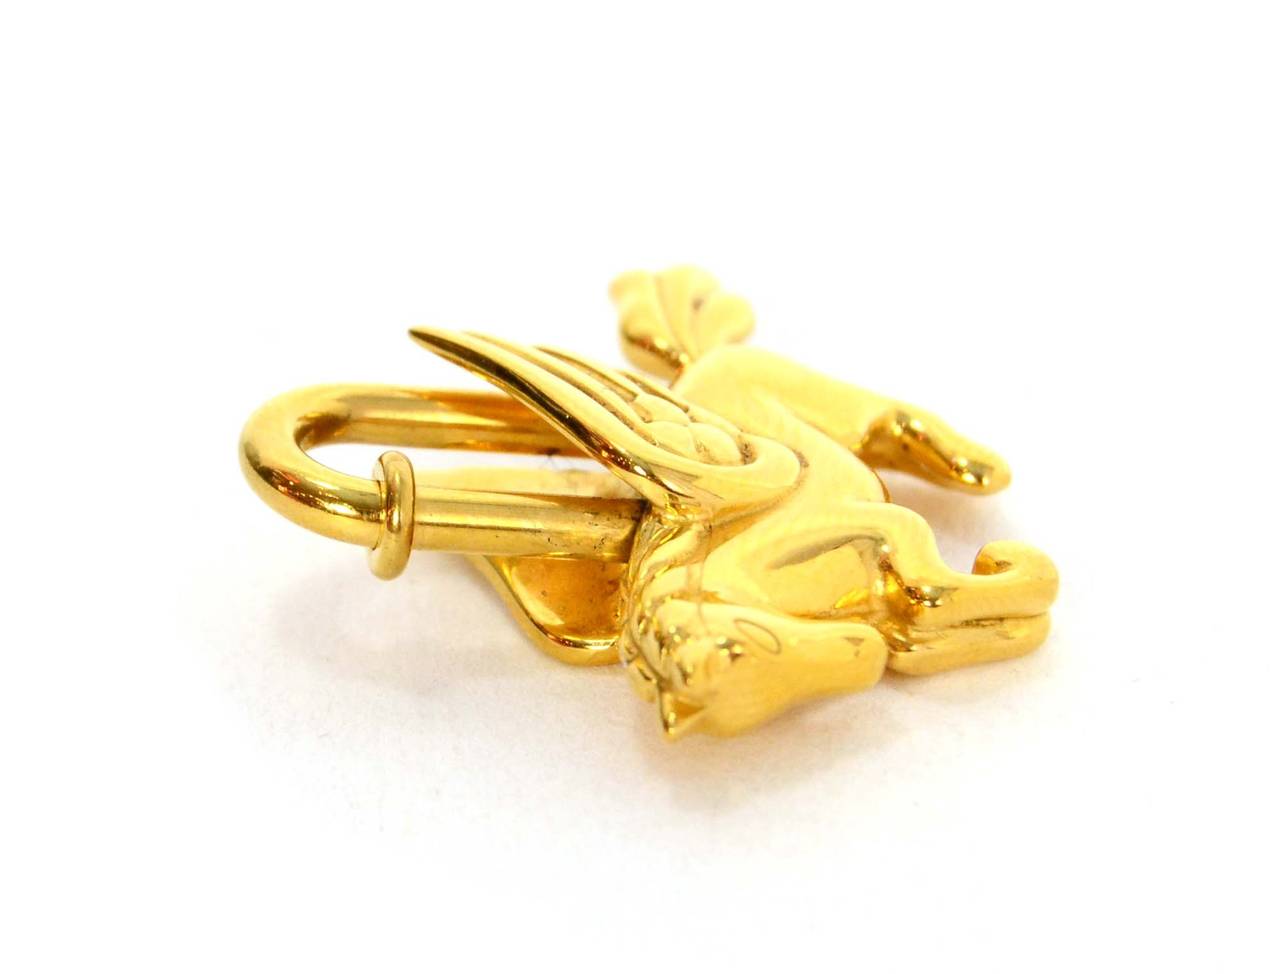 Hermes Goldtone Pegasus Cadena Lock Charm
Stamp: Hermes
Closure: Push lever on goldtone loop
Color: Goldtone
Materials: Metal
Overall Condition: Excellent with the exception of very faint, small surface scratches